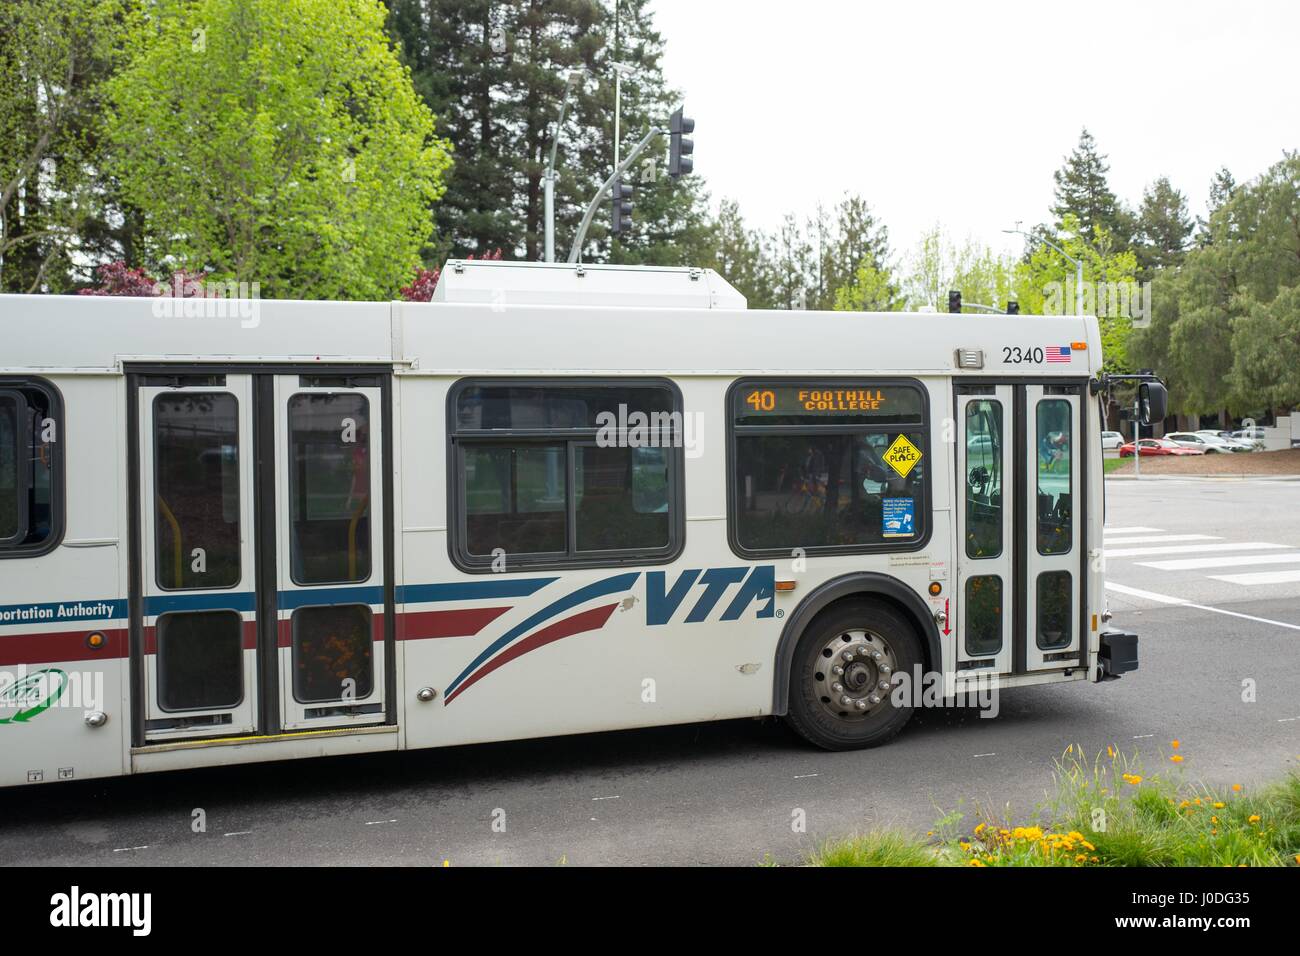 Valley Transportation Authority (VTA) bus at the Googleplex, the Silicon Valley headquarters of search engine and technology company Google Inc, Mountain View, California, April 7, 2017. VTA is the main public transit agency for Silicon Valley. Stock Photo